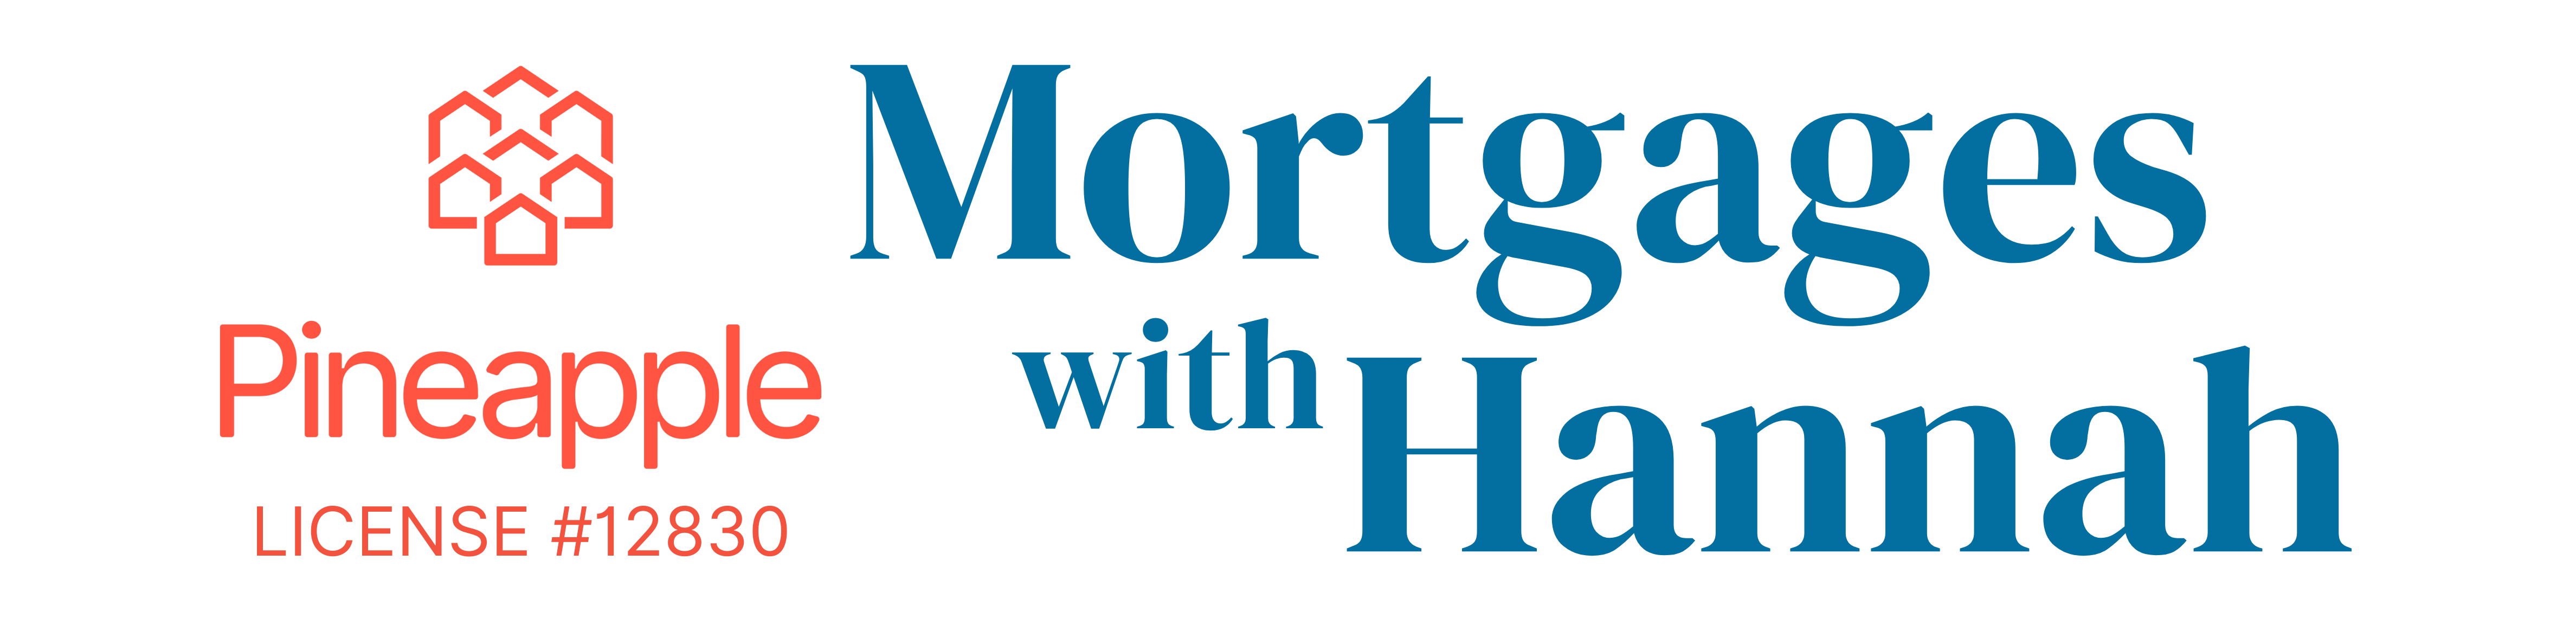 Mortgages with Hannah